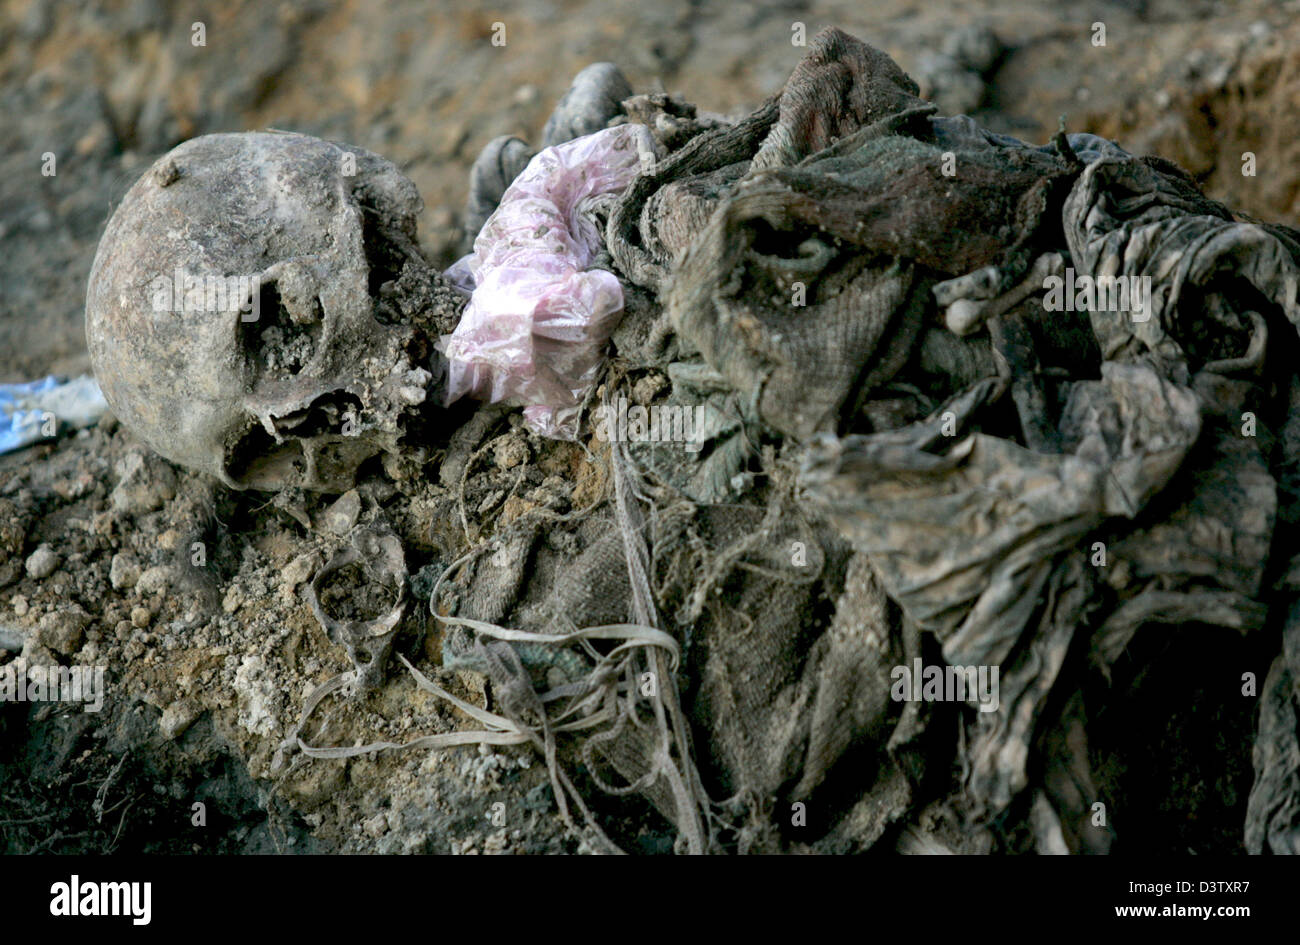 A picture shows mortal remains in a common grave in Snagovo near Zvornik, Bosnia and Herzegovina, 15 November 2006. Zvornik is located near Srebrenica at the border to Serbia. The city's number of inhabitants went down to 21,000, mostly Serbs and Serbian refugees from the Bosnian-Croatian Federation. The city set the sad scene for the massacre in July 1995, when Bosnian Serbs under Stock Photo